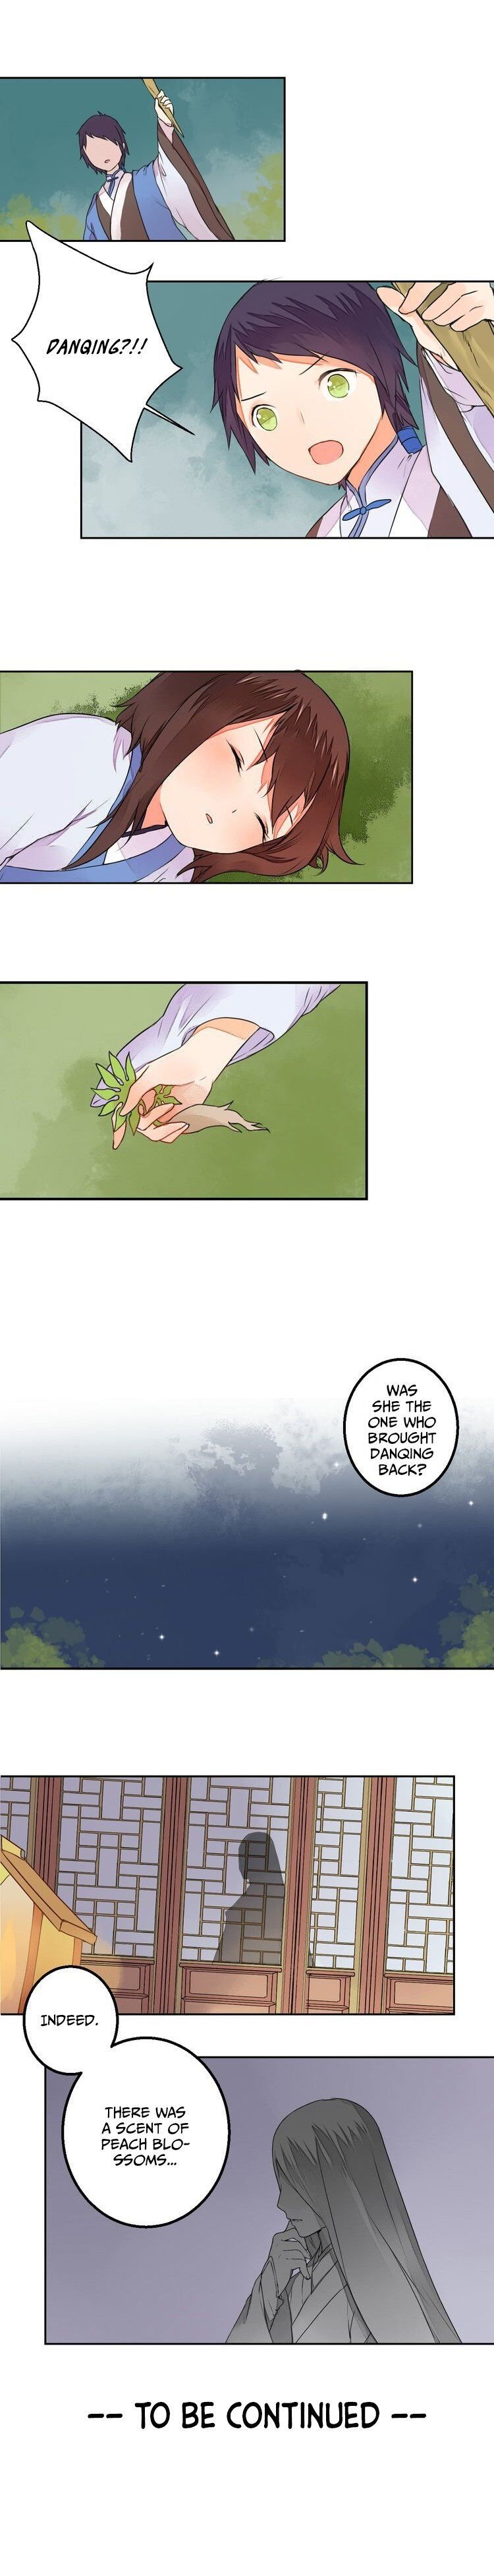 Peach Blossoms Chapter 10 - Page 4